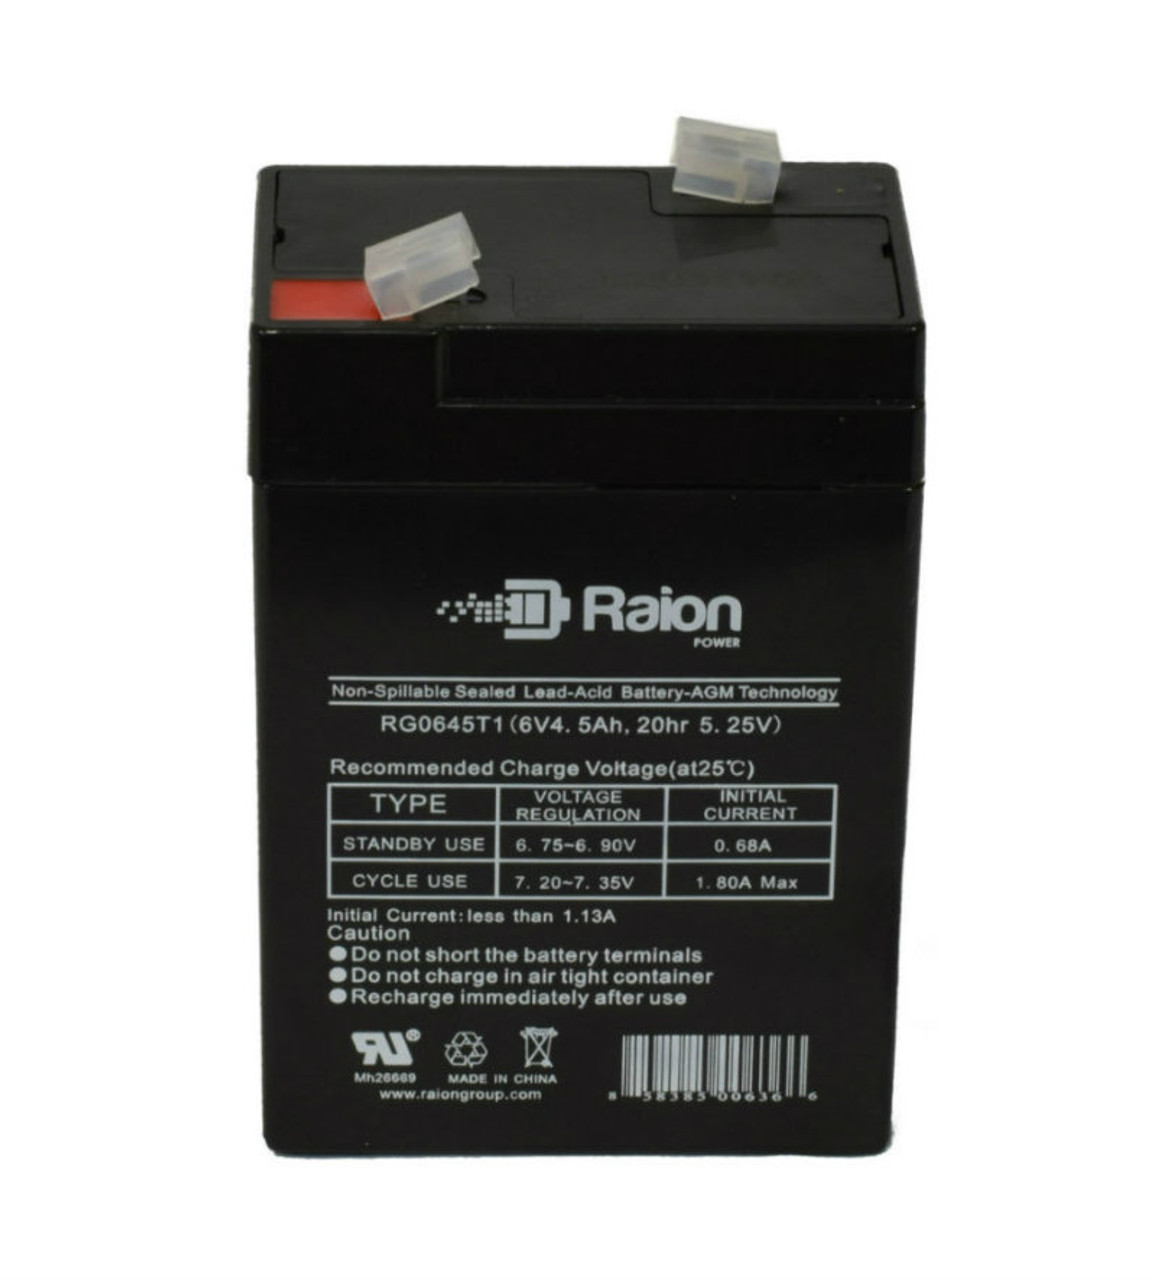 Raion Power RG0645T1 Replacement Battery Cartridge for Aokly Power 3-FM-5